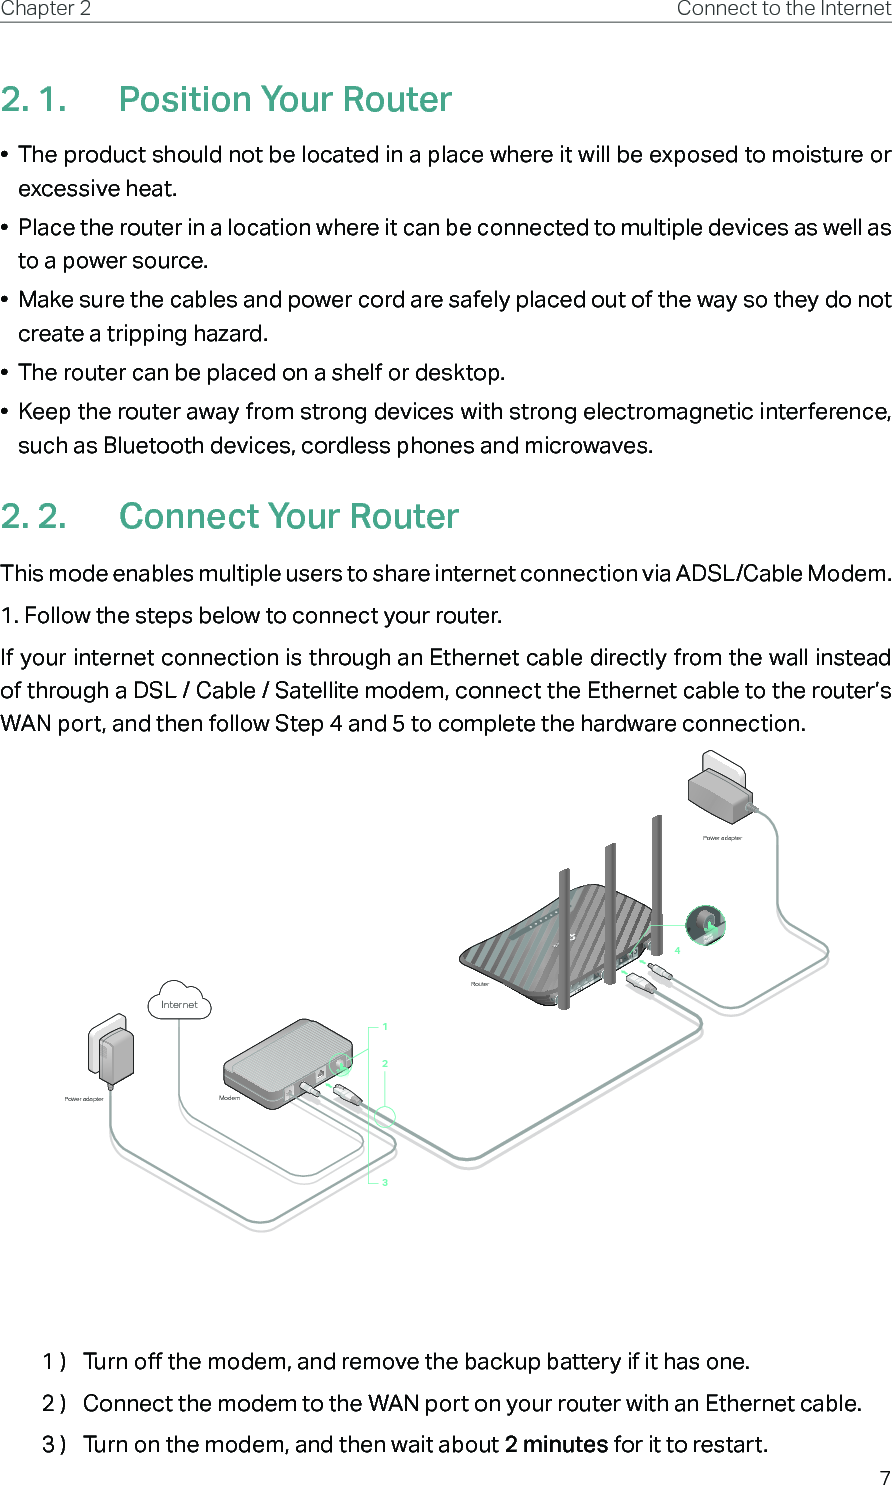 7Chapter 2 Connect to the Internet2. 1.  Position Your Router•  The product should not be located in a place where it will be exposed to moisture or excessive heat.•  Place the router in a location where it can be connected to multiple devices as well as to a power source.•  Make sure the cables and power cord are safely placed out of the way so they do not create a tripping hazard.•  The router can be placed on a shelf or desktop.•  Keep the router away from strong devices with strong electromagnetic interference, such as Bluetooth devices, cordless phones and microwaves.2. 2.  Connect Your RouterThis mode enables multiple users to share internet connection via ADSL/Cable Modem.1. Follow the steps below to connect your router.If your internet connection is through an Ethernet cable directly from the wall instead of through a DSL / Cable / Satellite modem, connect the Ethernet cable to the router’s WAN port, and then follow Step 4 and 5 to complete the hardware connection.ModemPower adapterPower adapterRouterInternet12341 )  Turn off the modem, and remove the backup battery if it has one.2 )  Connect the modem to the WAN port on your router with an Ethernet cable.3 )  Turn on the modem, and then wait about 2 minutes for it to restart.